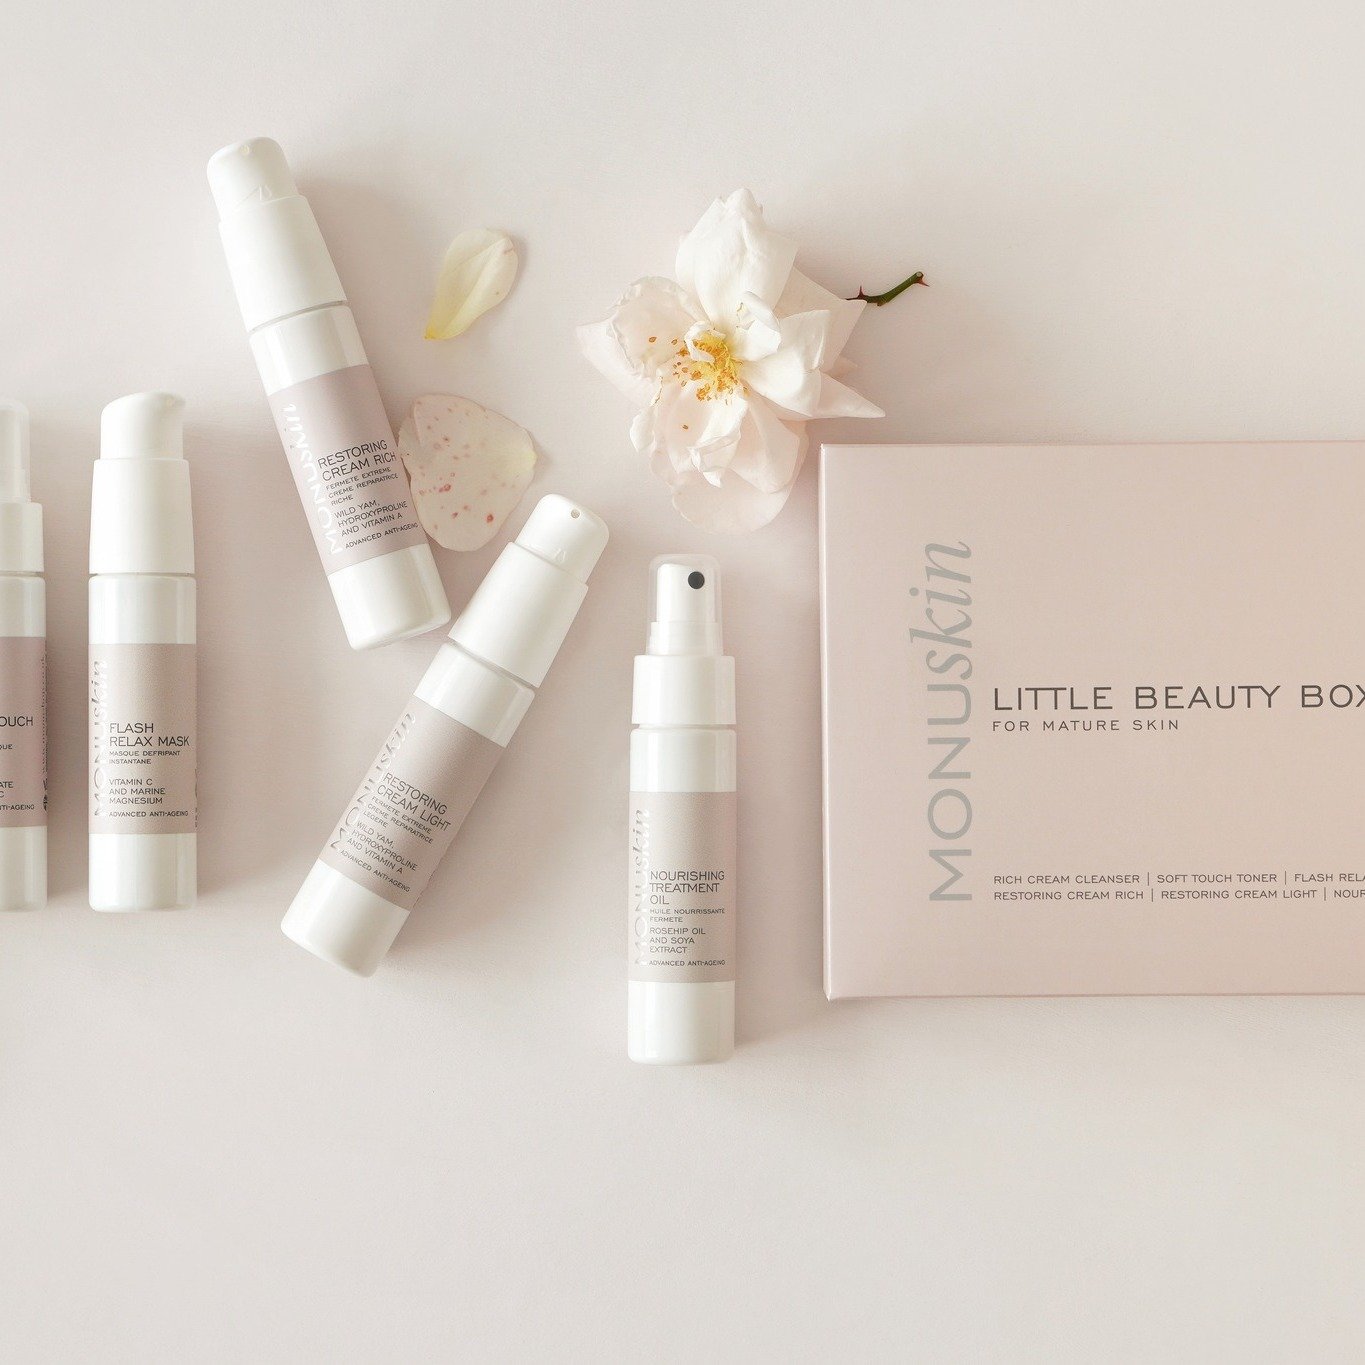 The Little Beauty Box for Mature Skin - we've done the skincare edit for you....

 #smallbatchskincareuk #cleanbeautyblogger #beautytherapist #professionalskintherapist #smallbatchskincare #monuskincare #monuskin